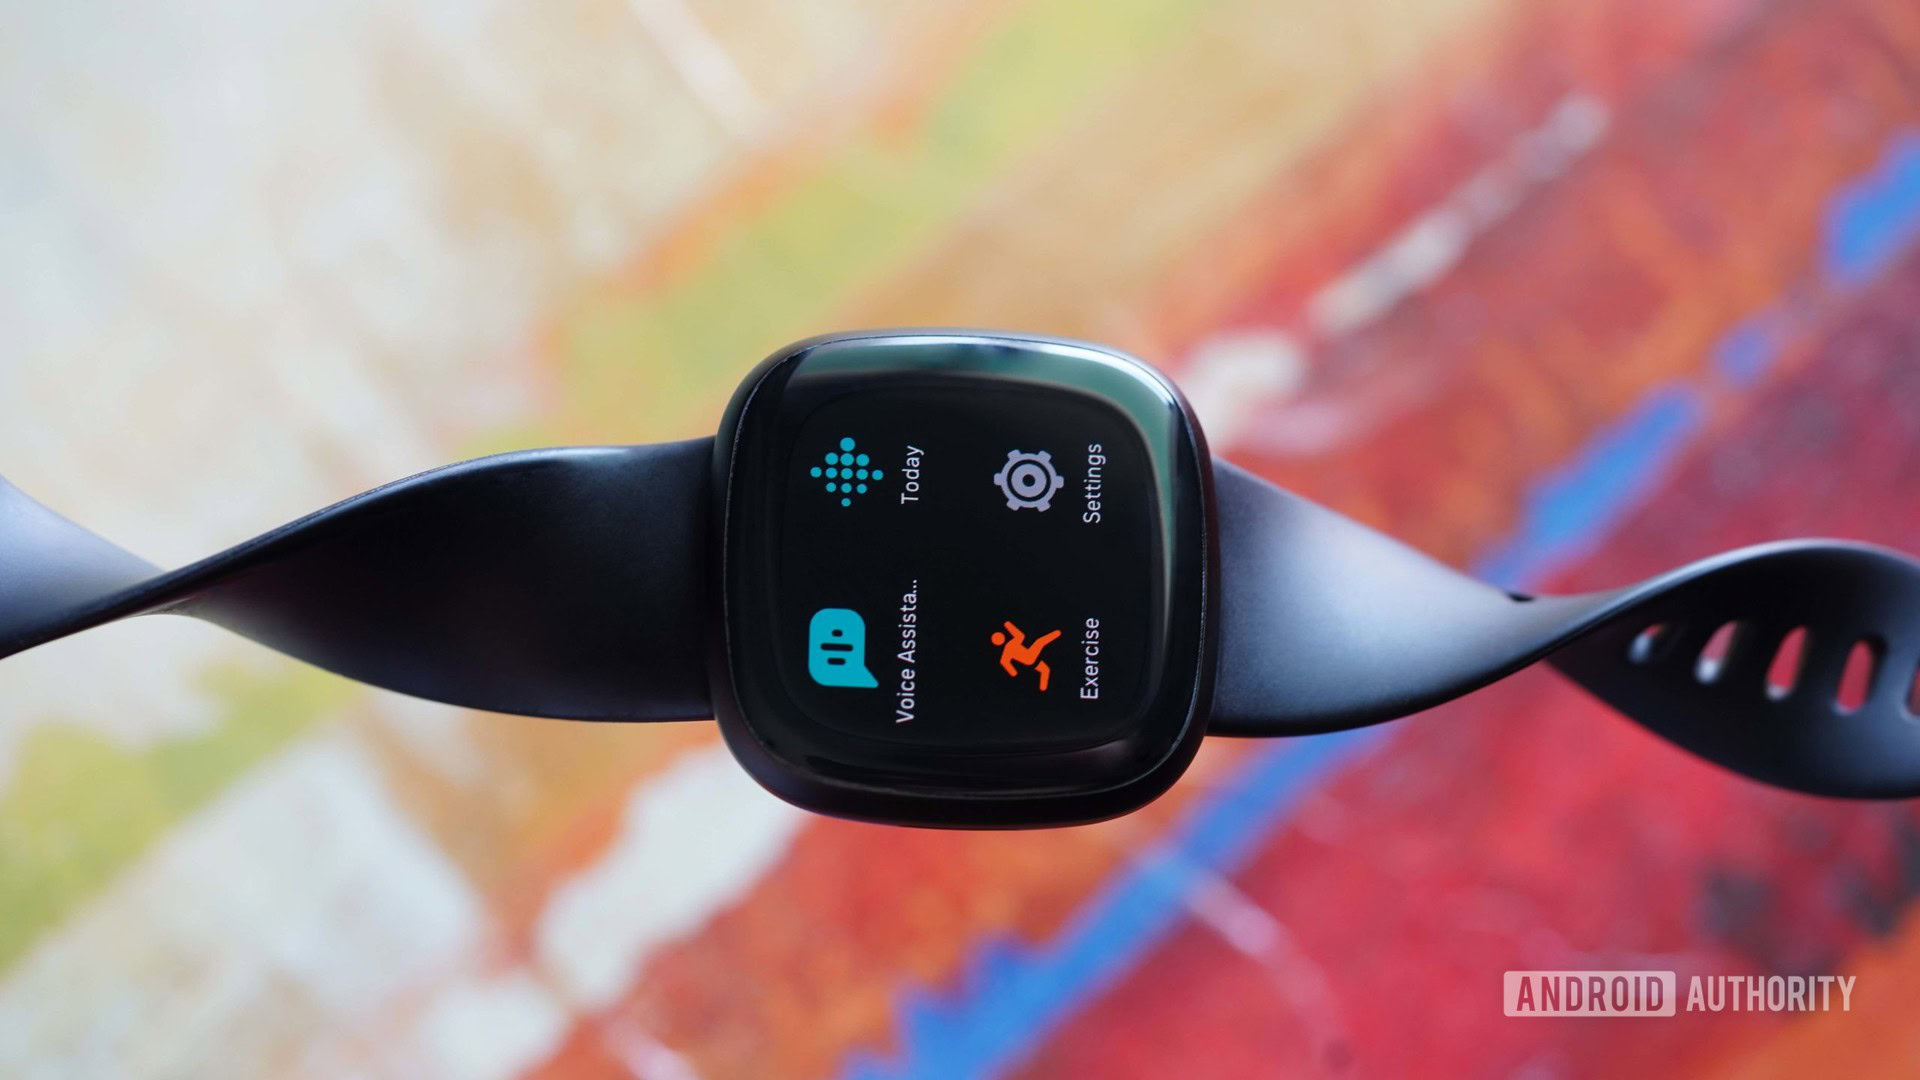 New Fitbit Devices: Sense, Versa 3 and Inspire 2 - GetConnected